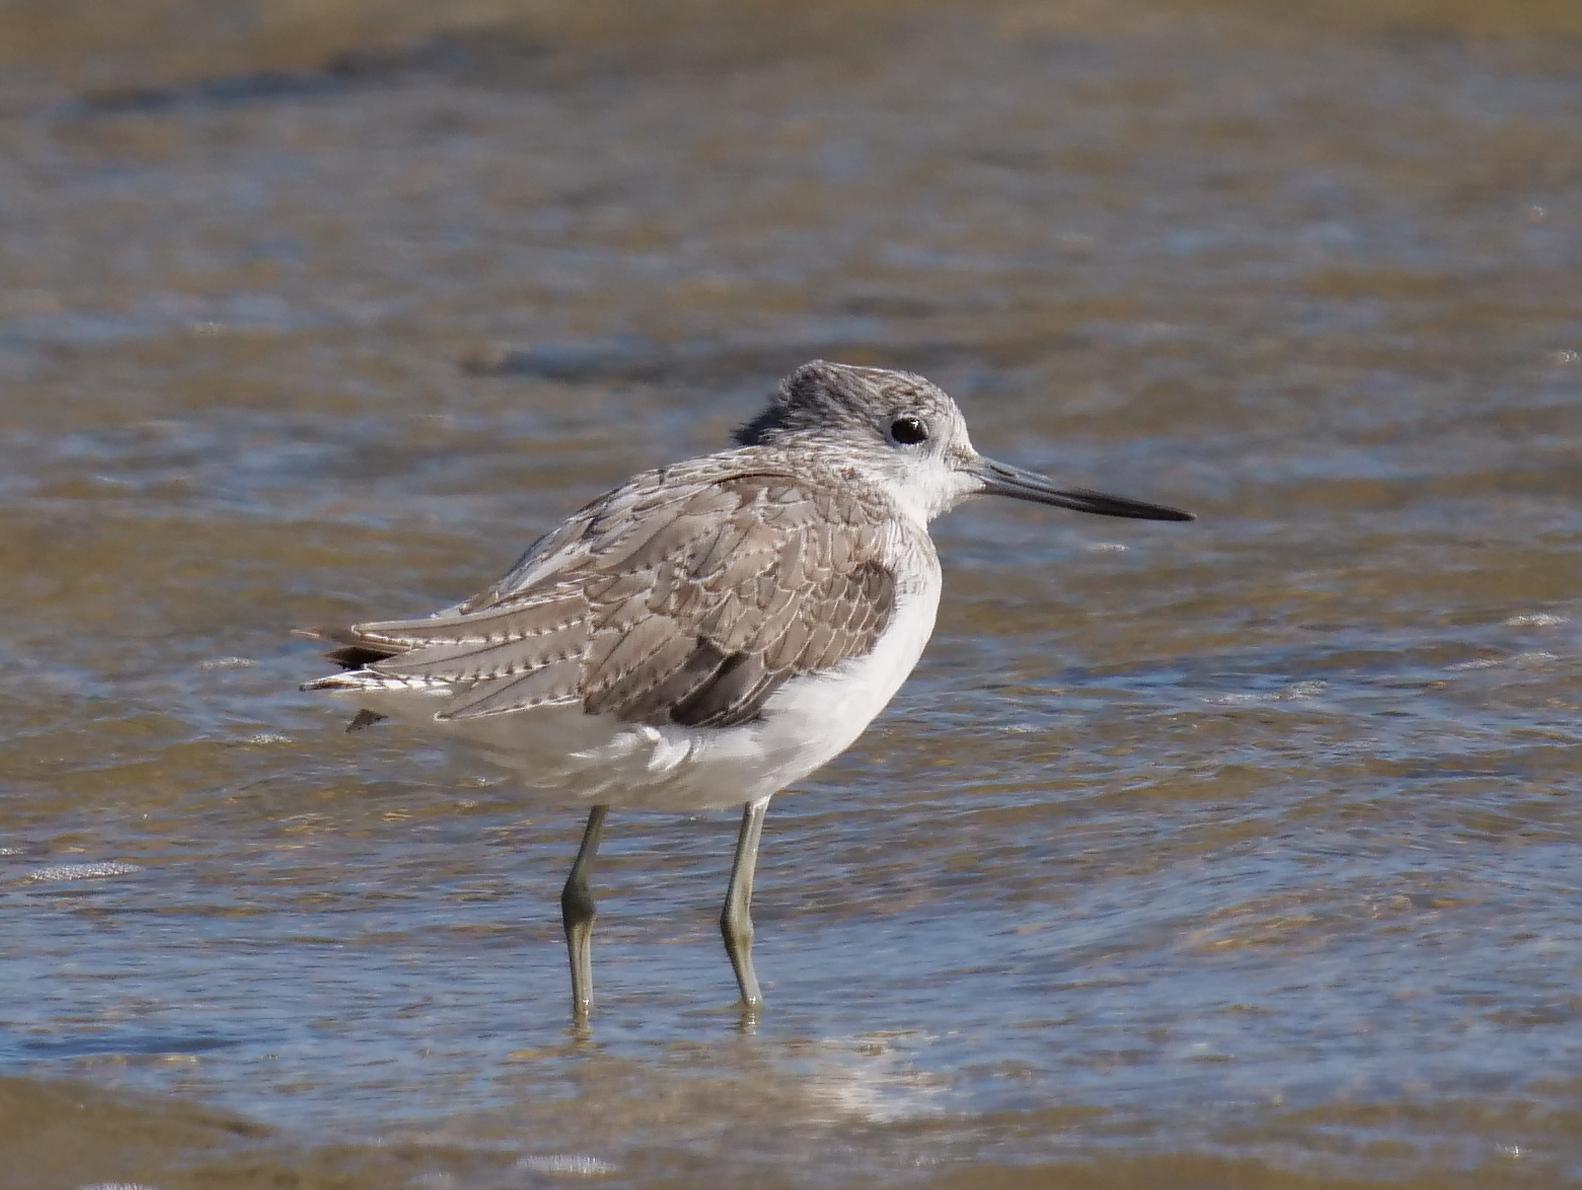 Common Greenshank Photo by Peter Lowe